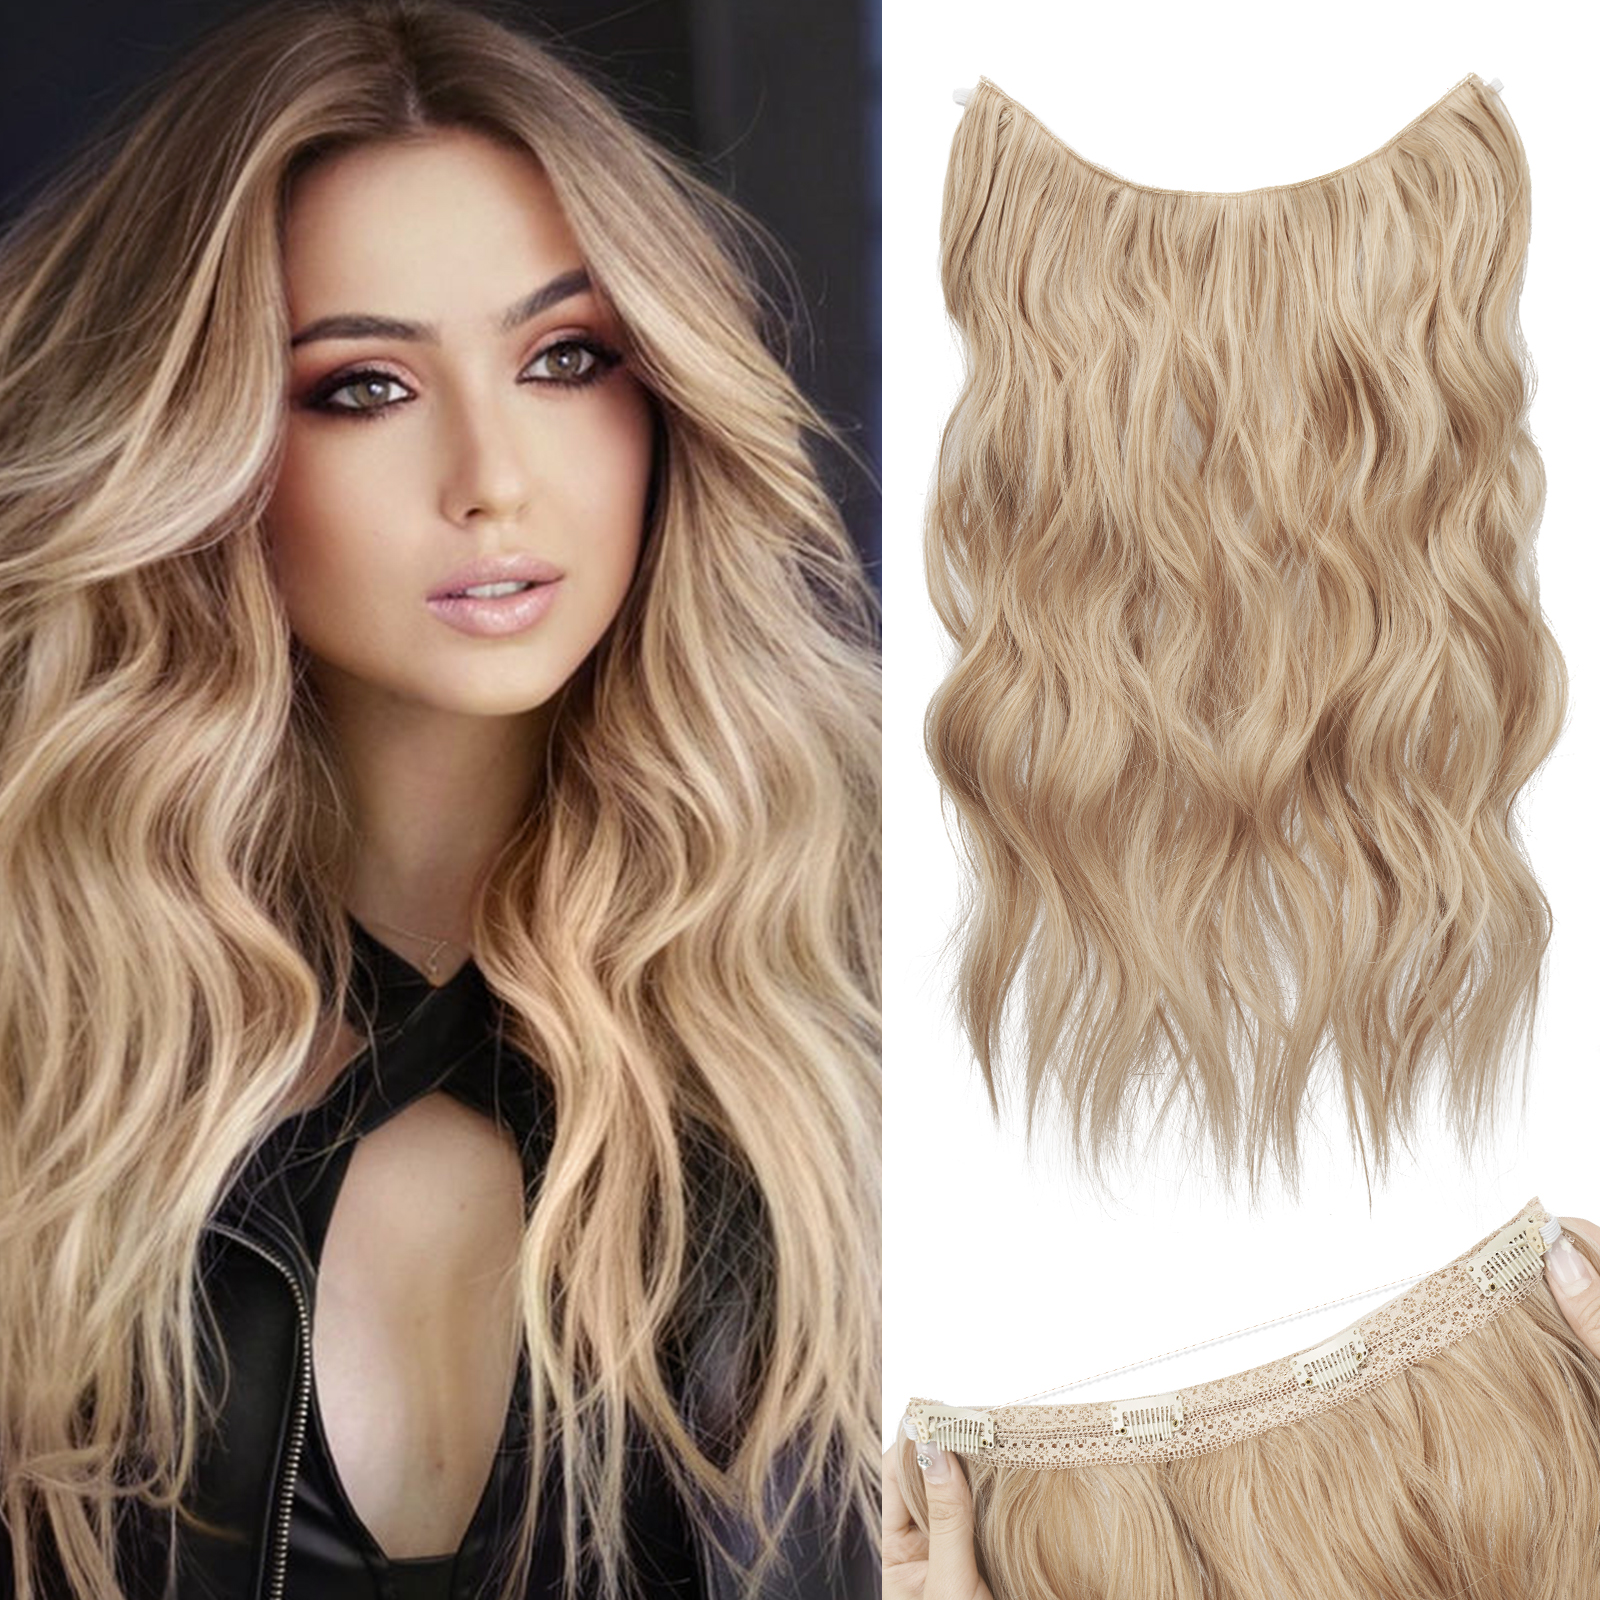 Invisible Wire Hair Extensions with Transparent Wire Adjustable Size 4  Secure Clips Long Wavy Secret Hairpiece (24 Inch, Light Brown mix Highlight